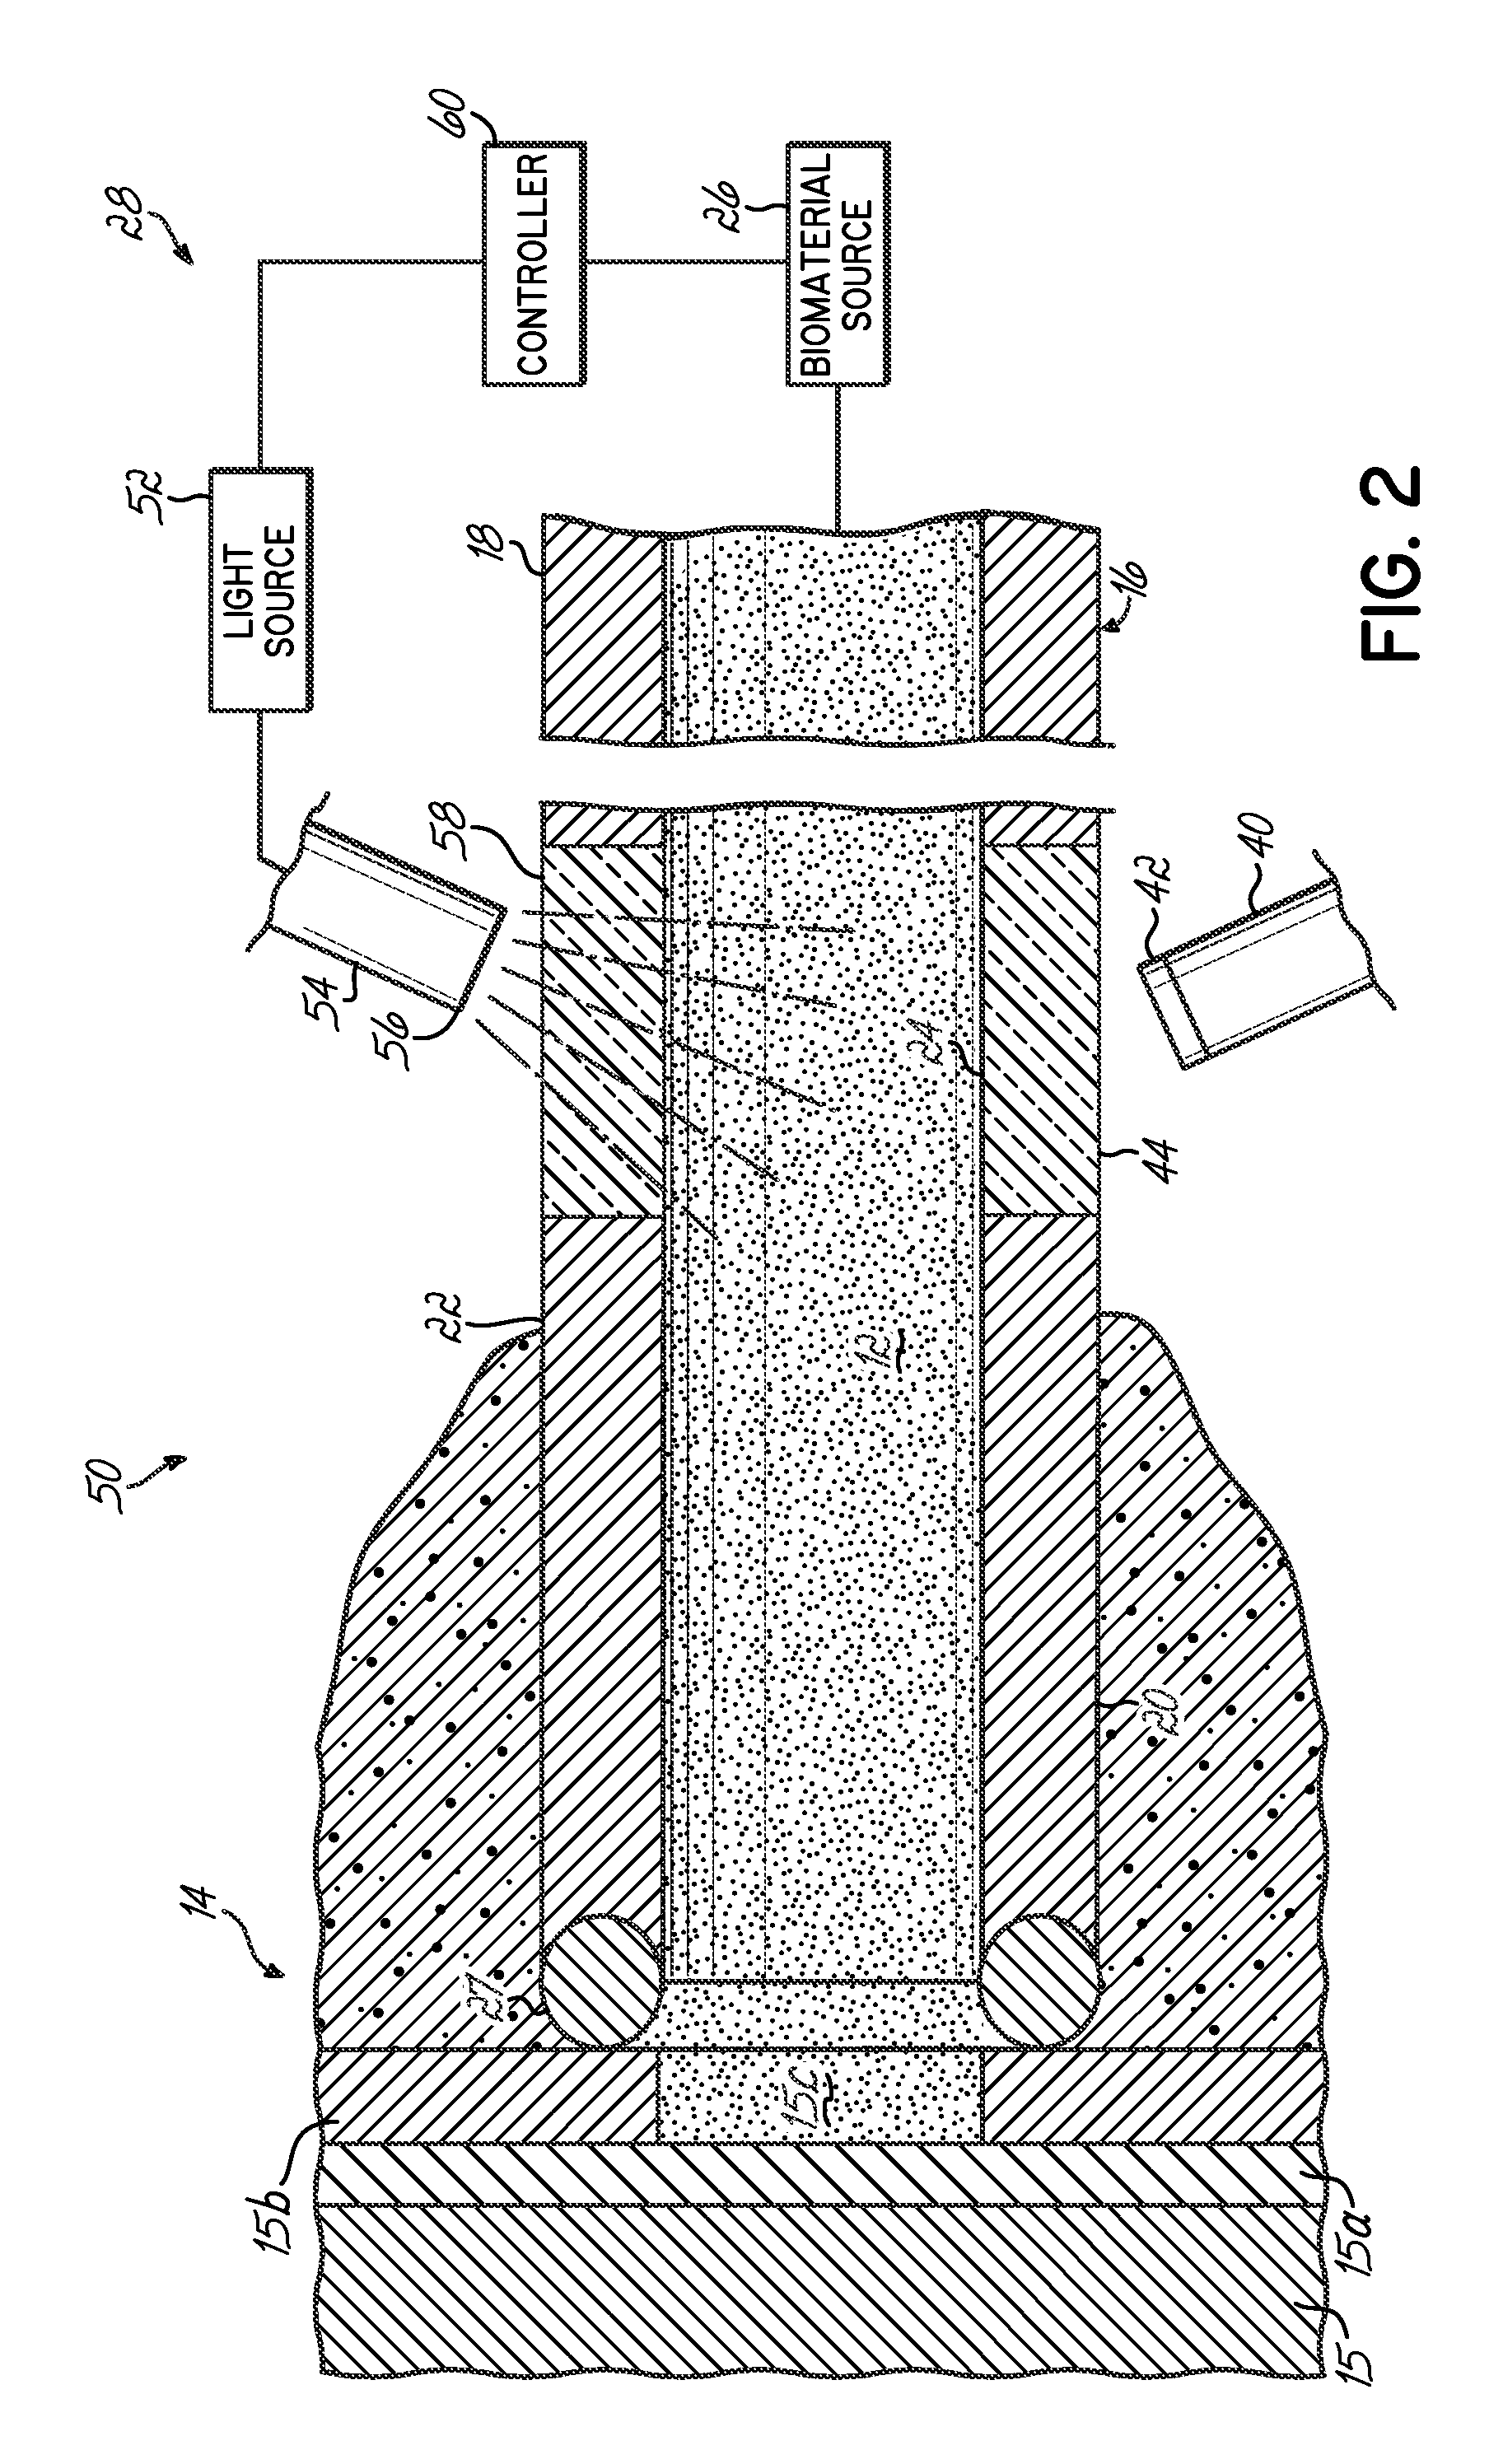 Apparatus and method for delivering a biocompatible material to a surgical site